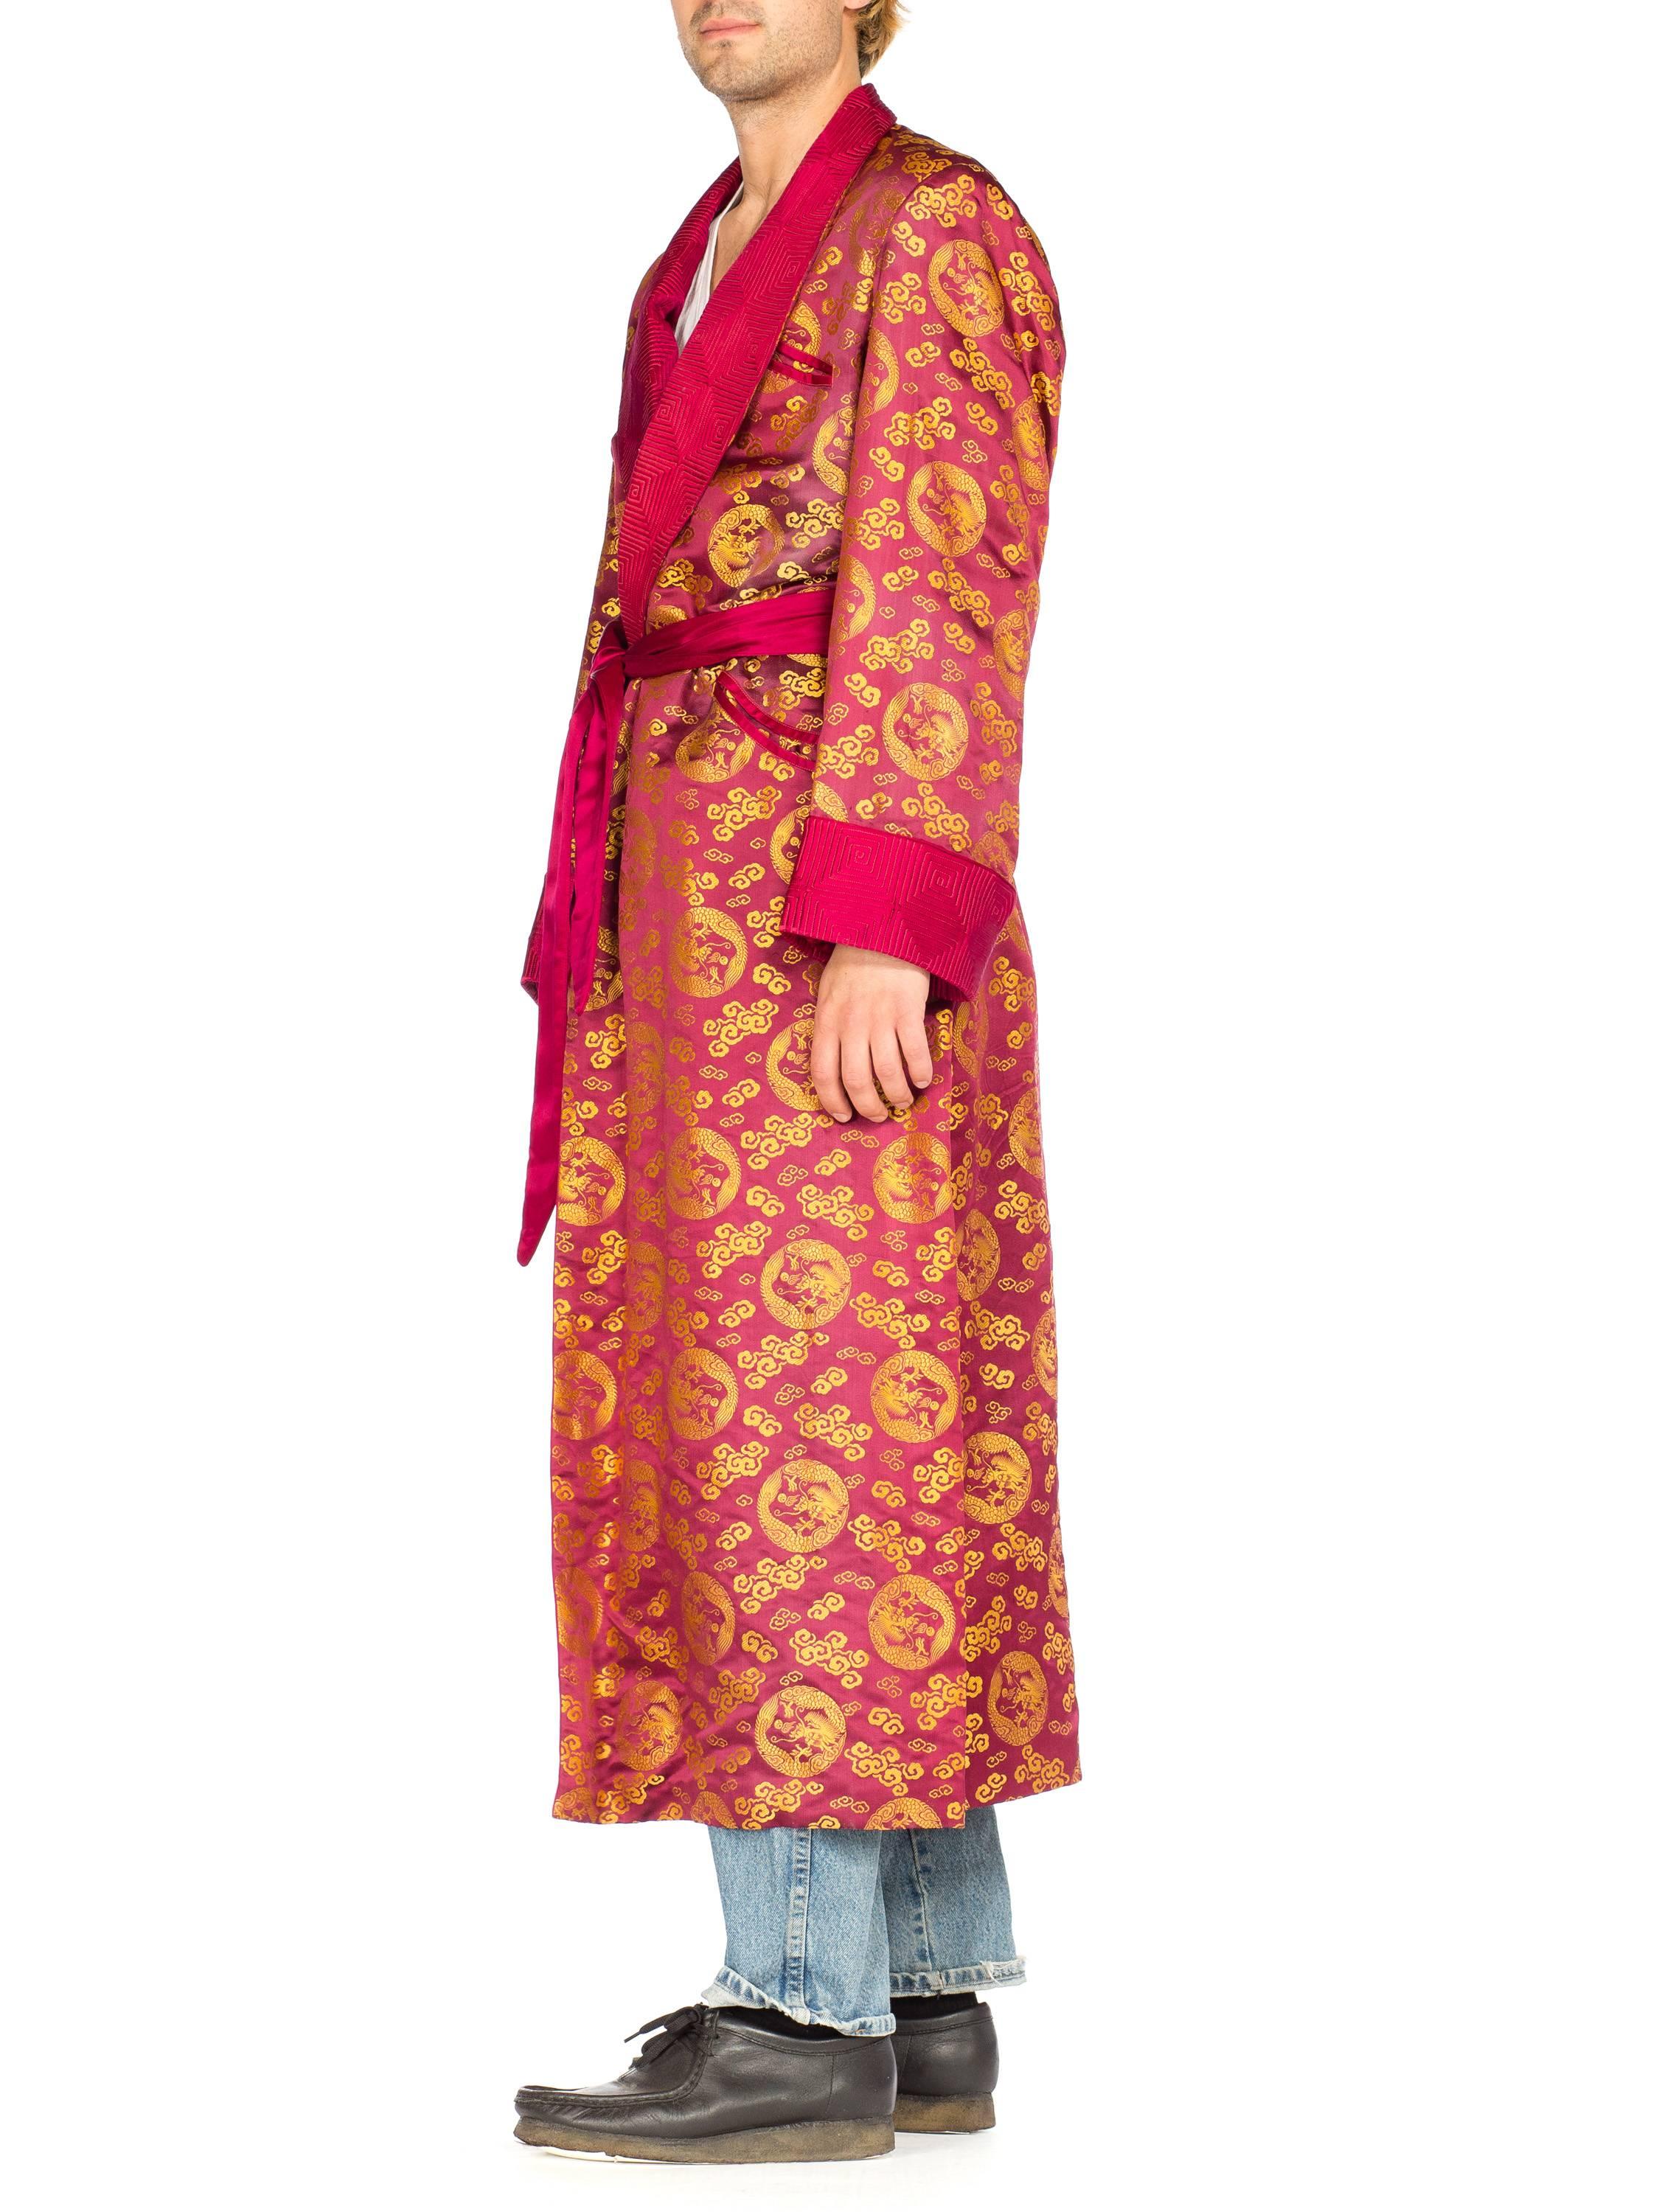 Red Antique mens Chinese Silk Robe, 1940s 